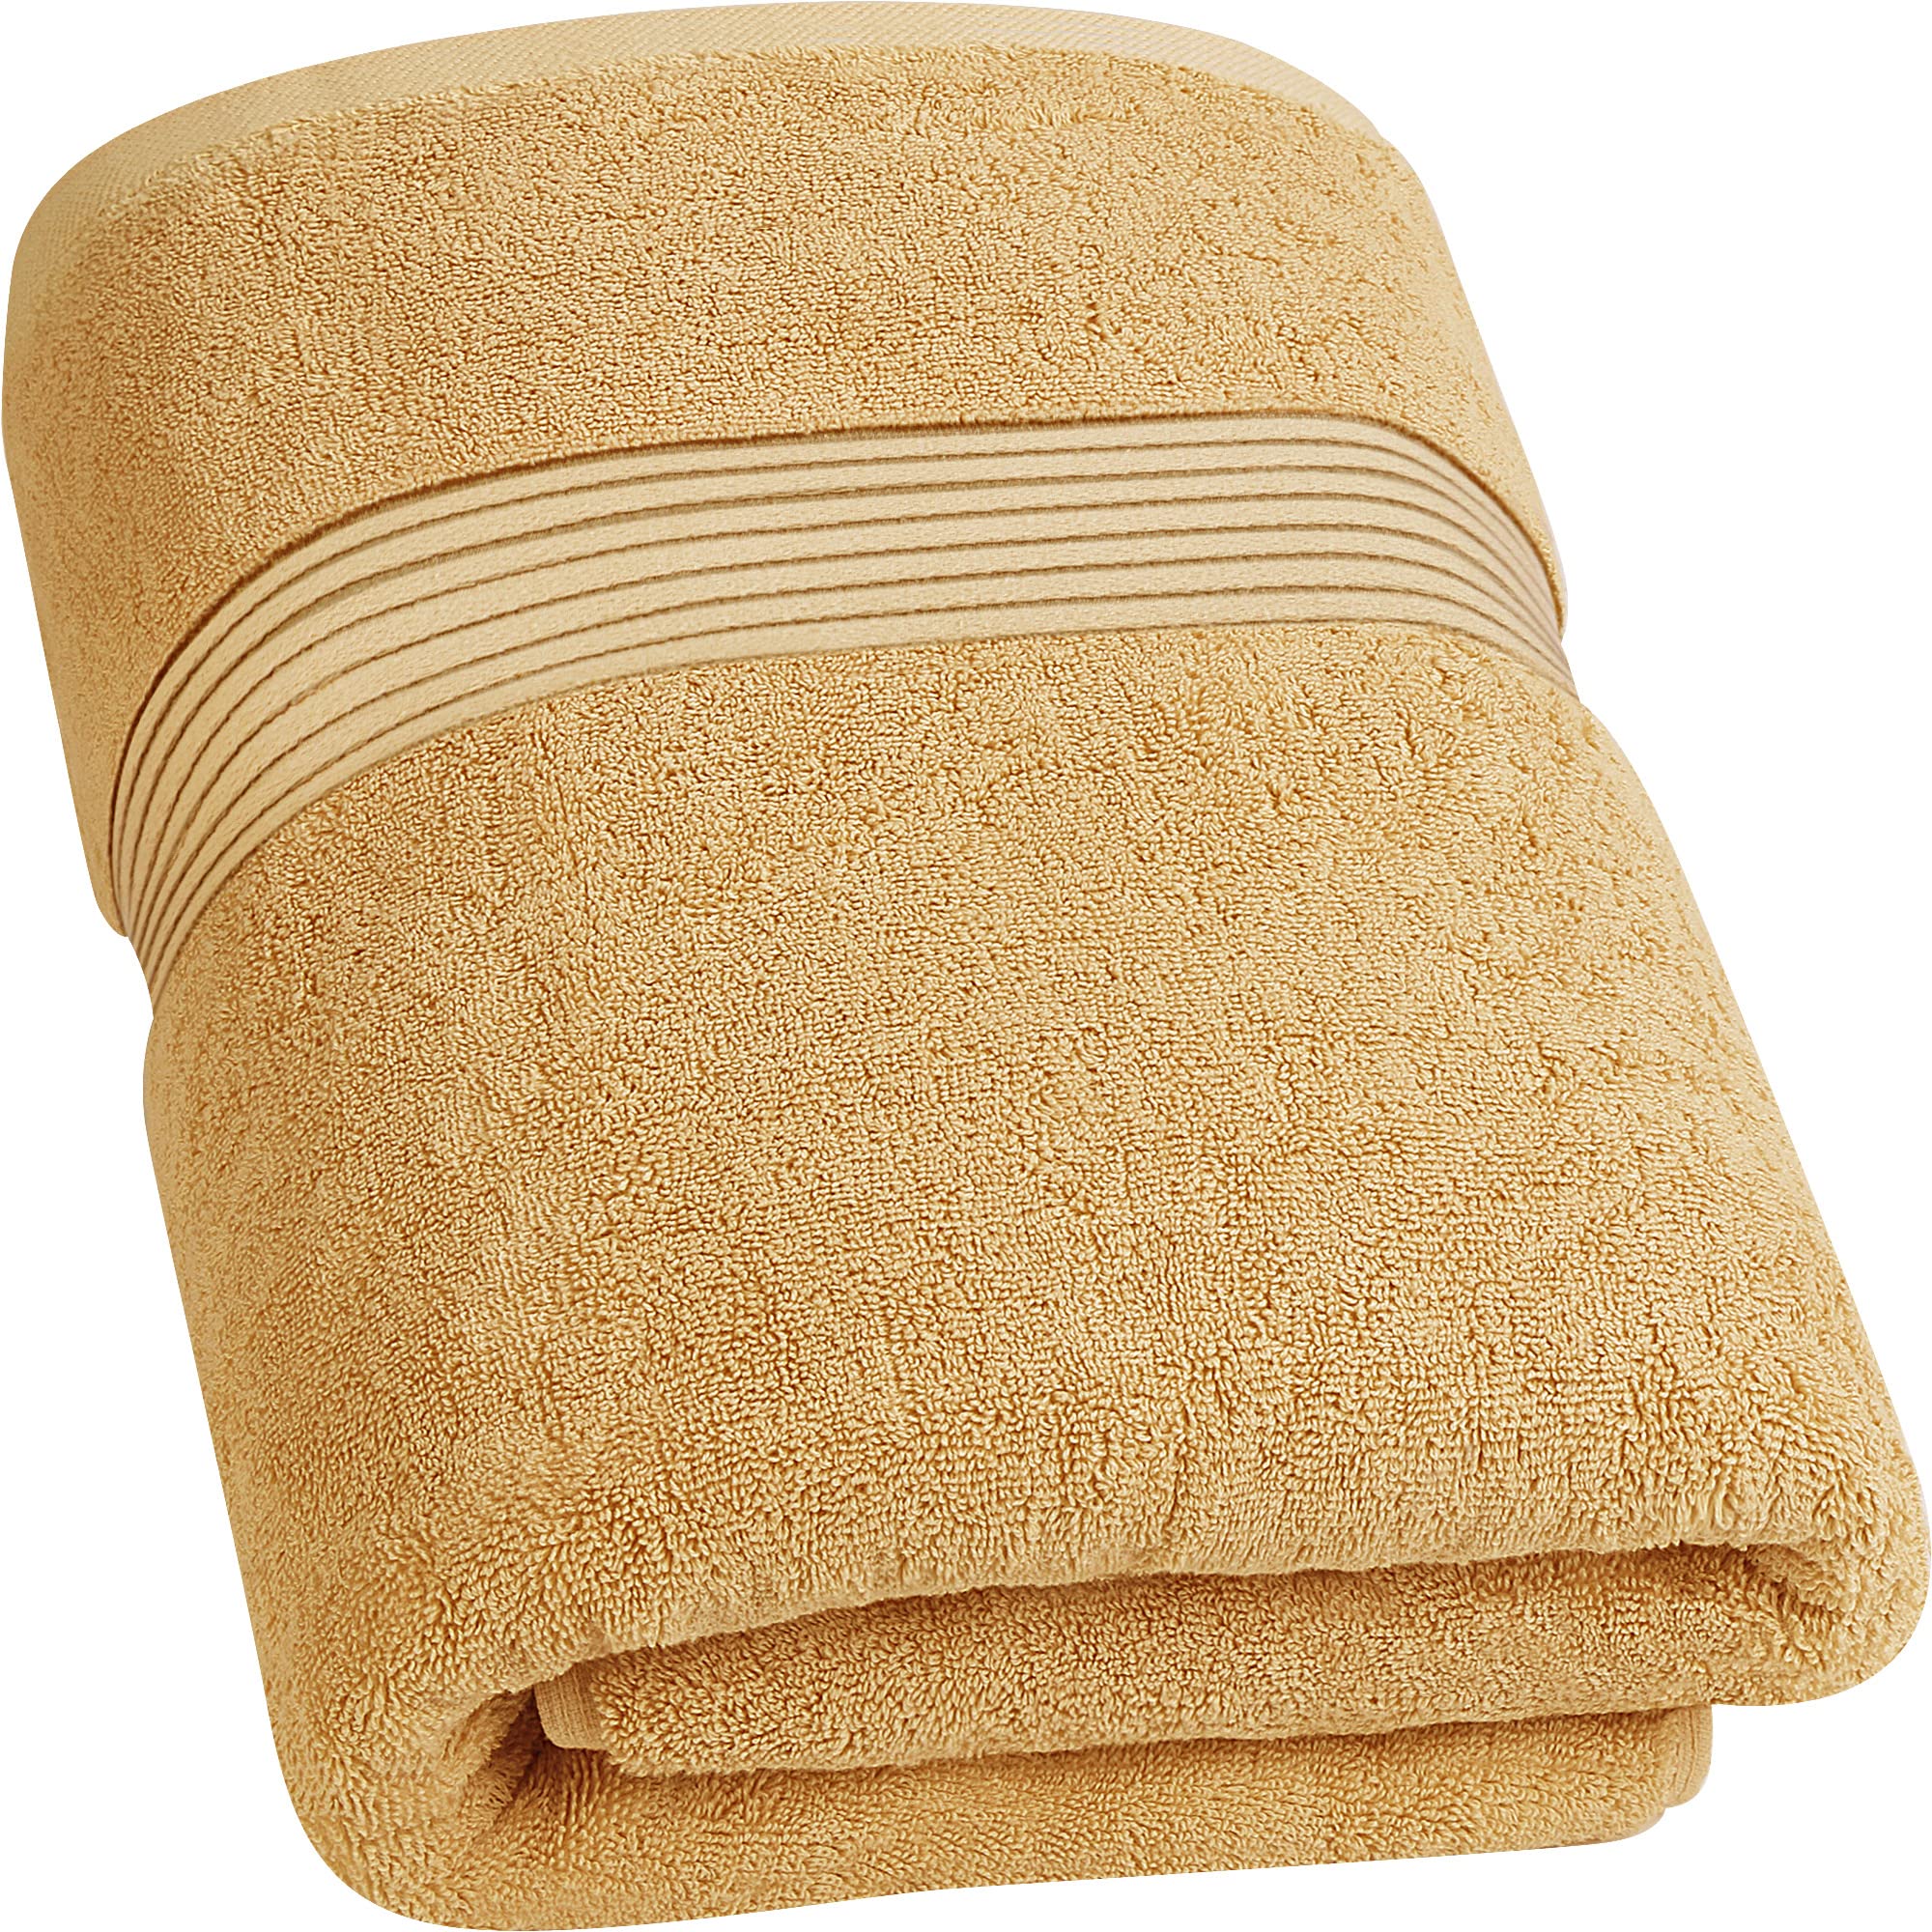 Utopia Towels - Luxurious Jumbo Bath Sheet - 600 Gsm 100 Cotton Highly Absorbent And Quick Dry Extra Large Bath Towel - Super So